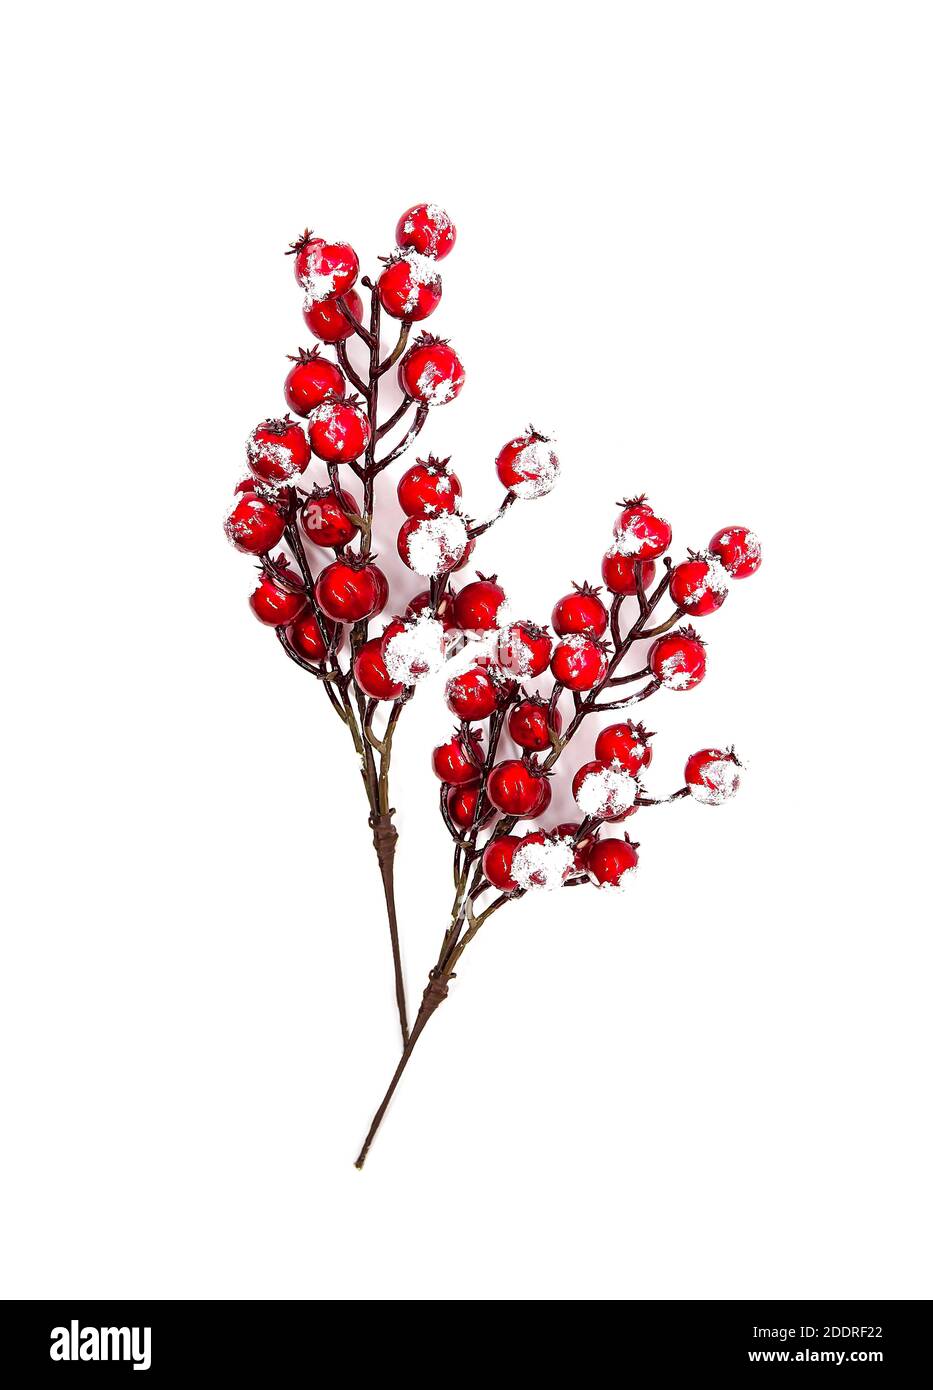 Festive New Year or Christmas background with red holly plant berries in snow. Stock Photo